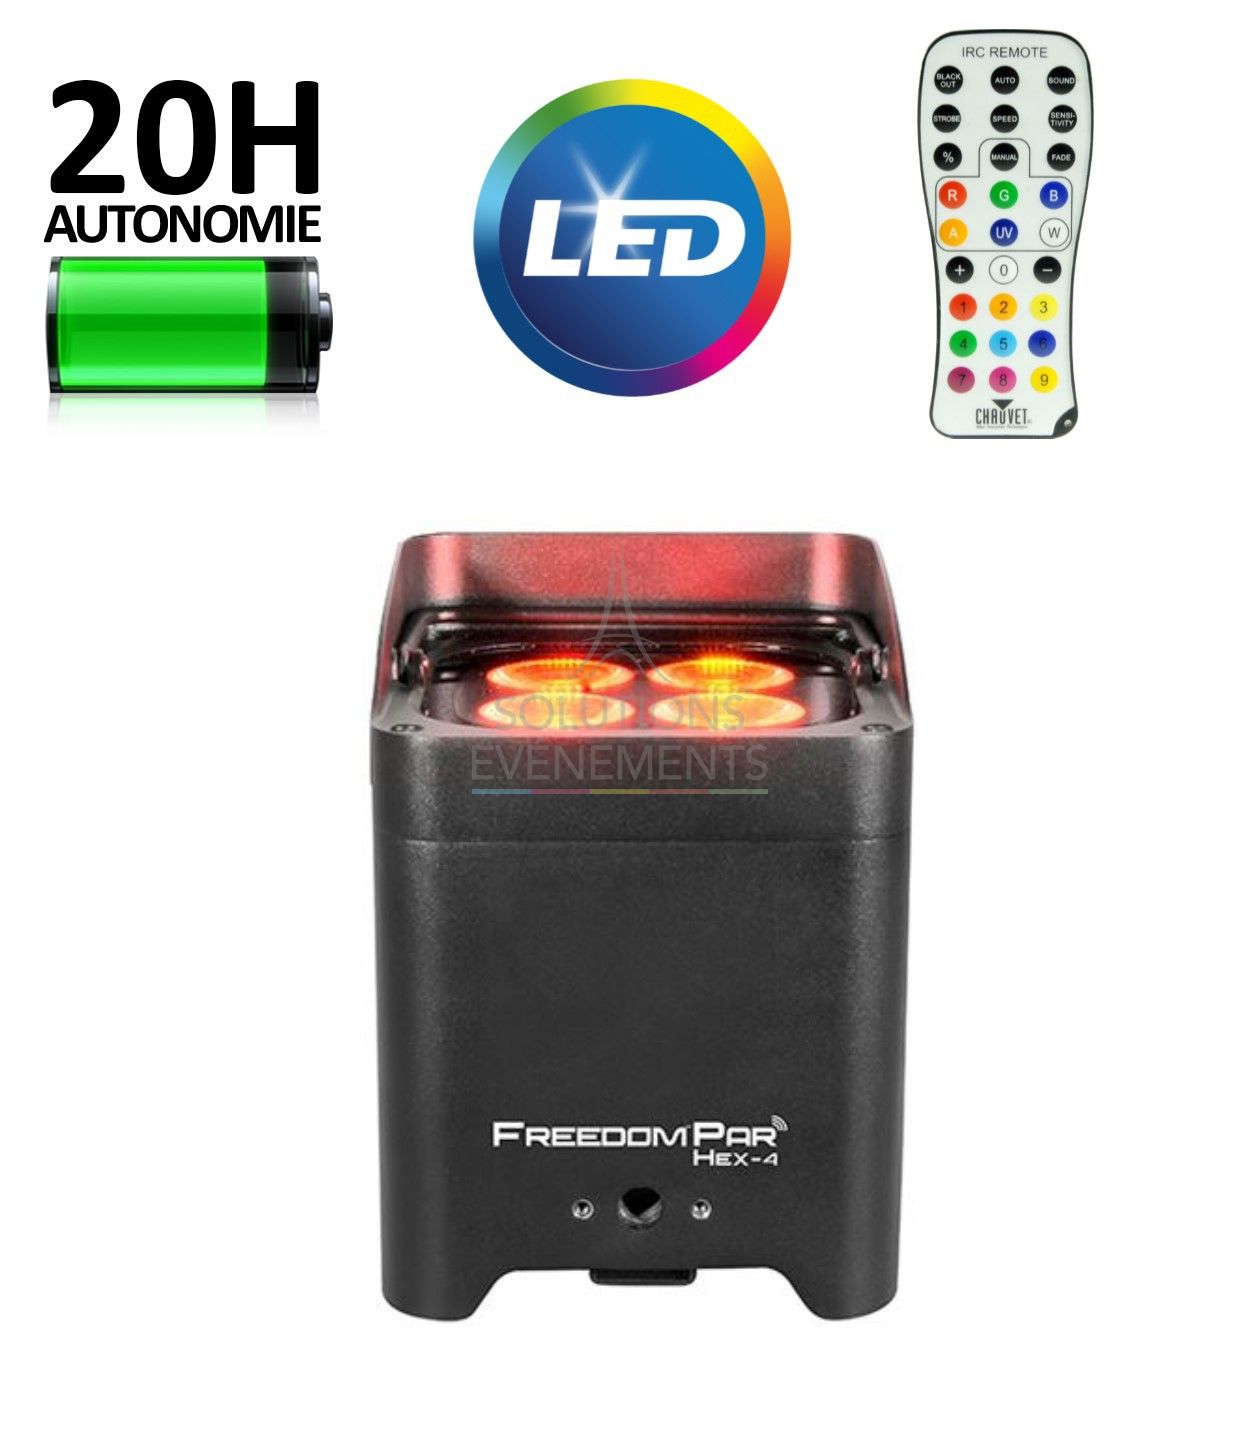 Battery-powered LED projector rental